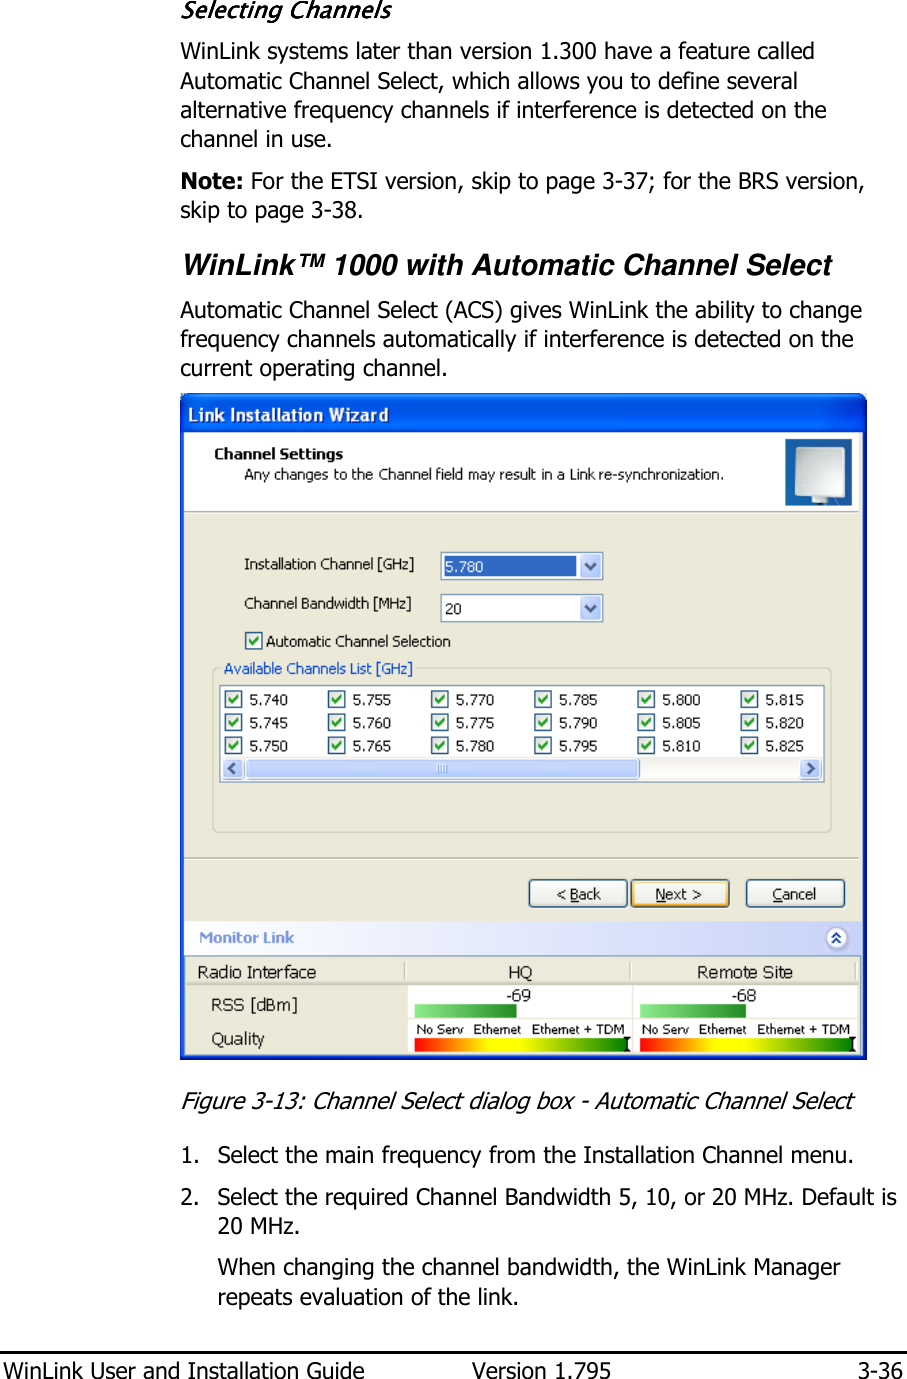  WinLink User and Installation Guide  Version 1.795  3-36  Selecting ChanSelecting ChanSelecting ChanSelecting Channelsnelsnelsnels    WinLink systems later than version 1.300 have a feature called Automatic Channel Select, which allows you to define several alternative frequency channels if interference is detected on the channel in use. Note: For the ETSI version, skip to page 3-37; for the BRS version, skip to page 3-38.   WinLink™ 1000 with Automatic Channel Select  Automatic Channel Select (ACS) gives WinLink the ability to change frequency channels automatically if interference is detected on the current operating channel.  Figure  3-13: Channel Select dialog box - Automatic Channel Select 1. Select the main frequency from the Installation Channel menu. 2. Select the required Channel Bandwidth 5, 10, or 20 MHz. Default is 20 MHz. When changing the channel bandwidth, the WinLink Manager repeats evaluation of the link. 